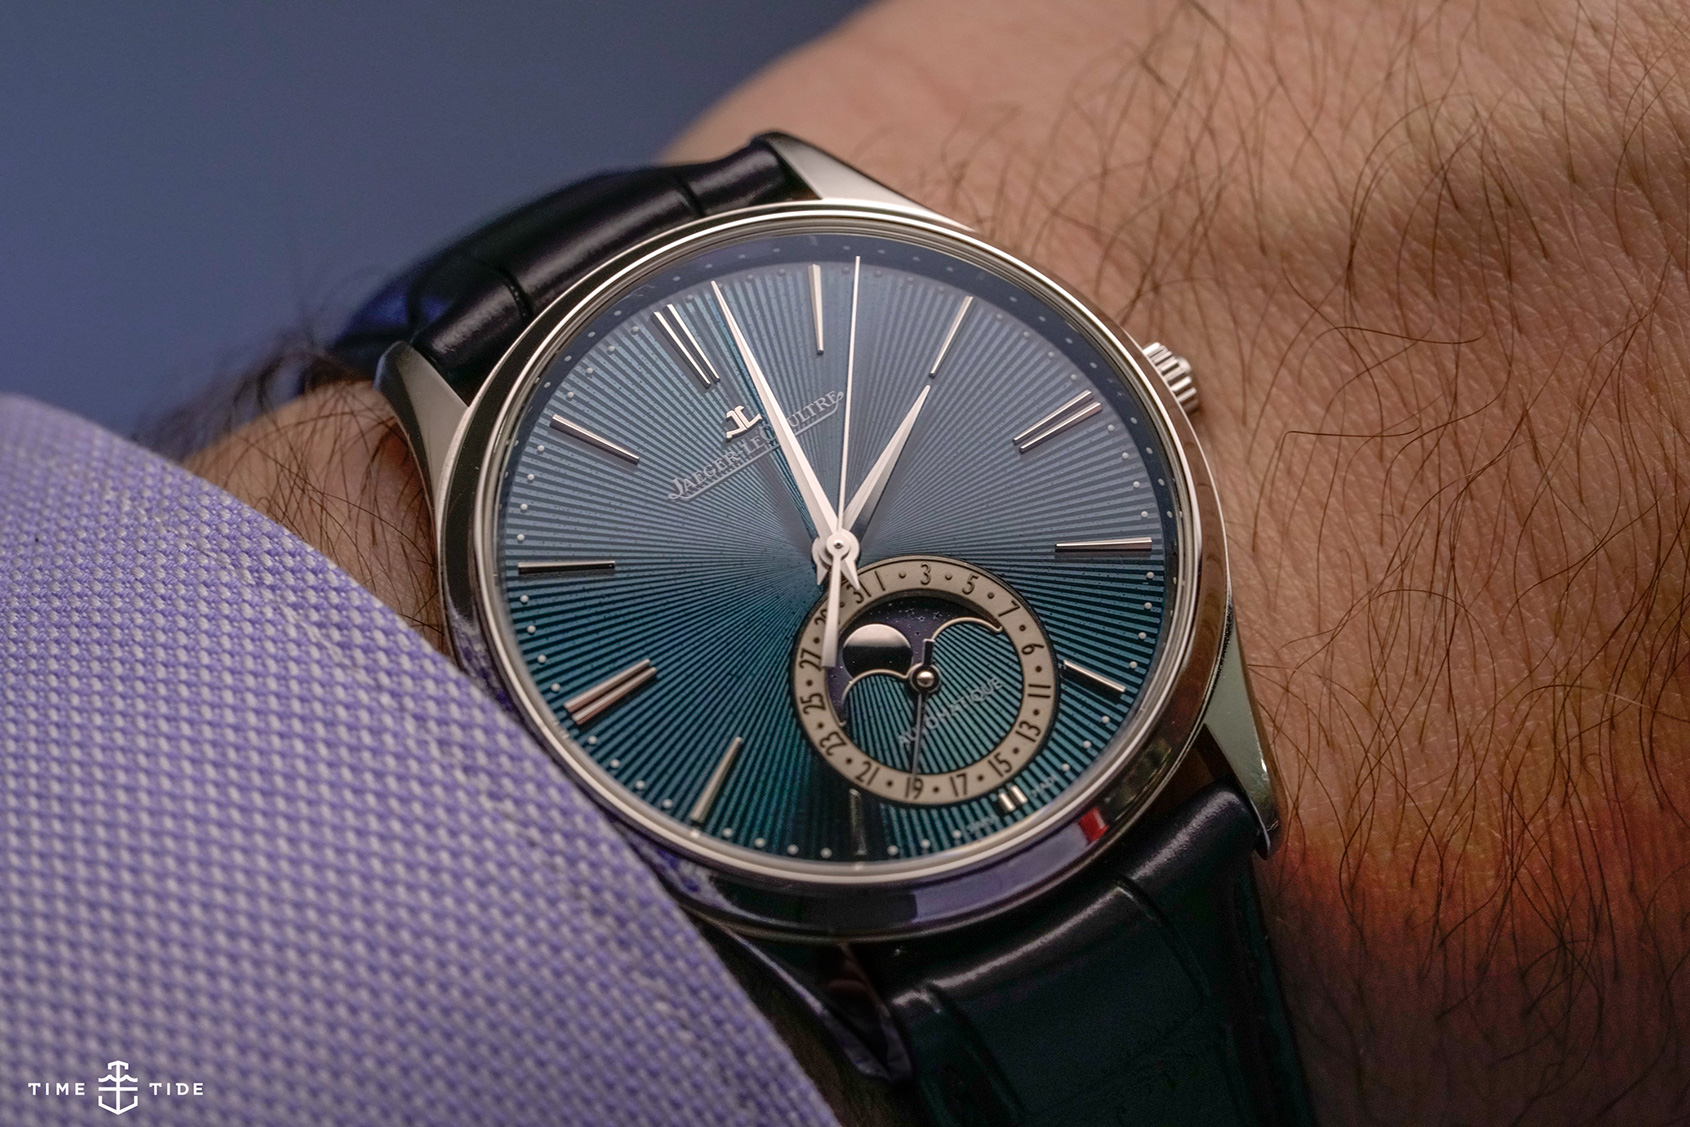 VIDEO: 5 stunning Jaeger-LeCoultre watches from SIHH 2019